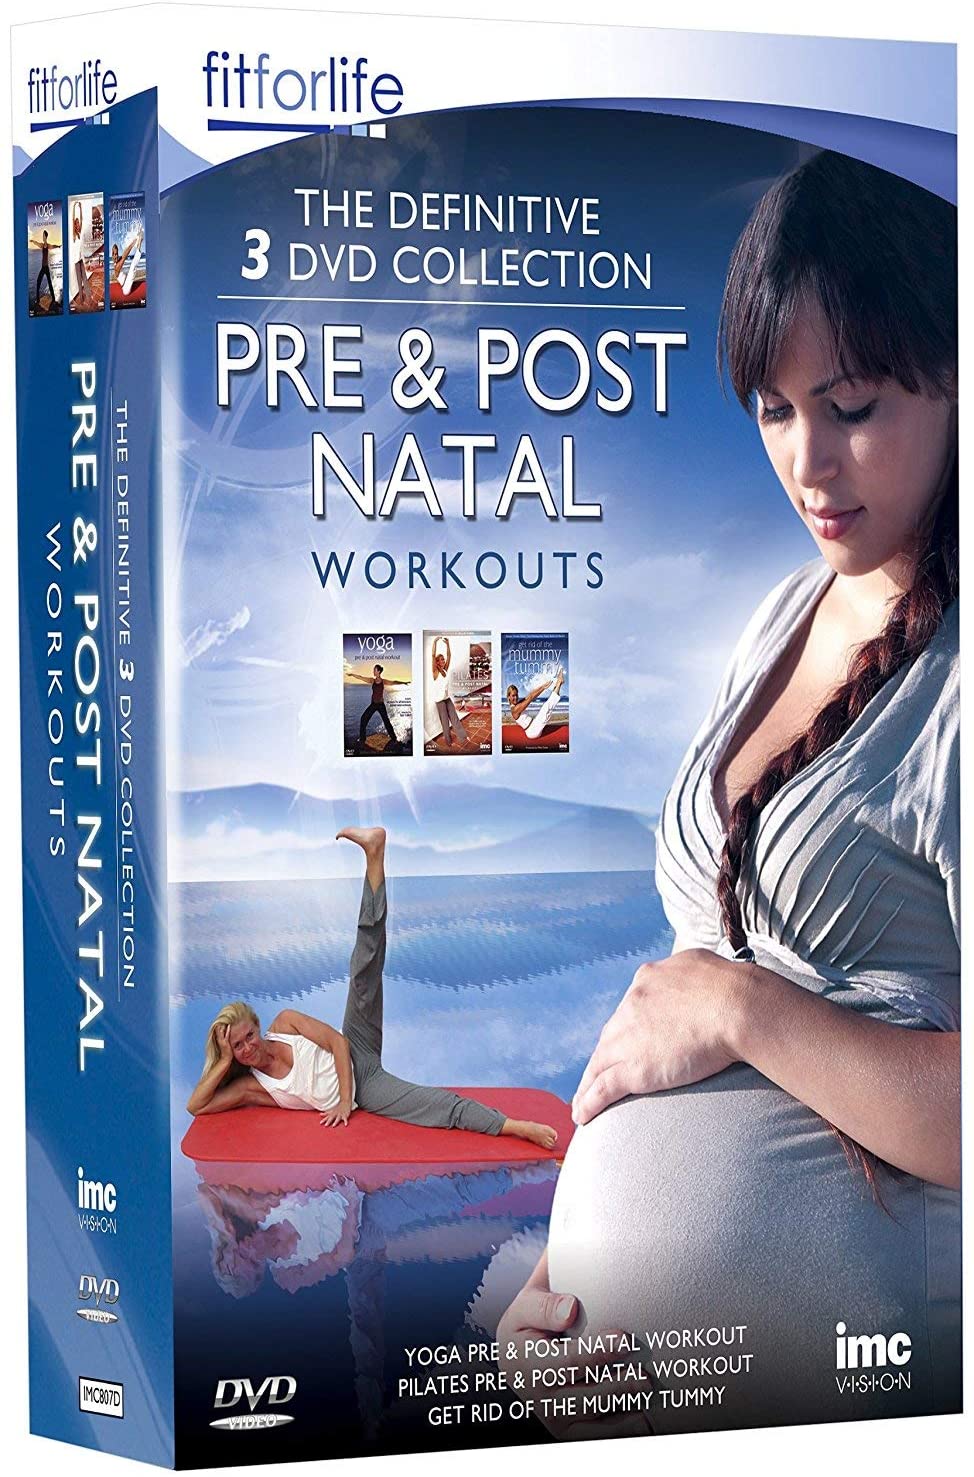 Pre & Post Natal Workout Yoga, Pilates & How to Get Rid of the Mummy Tummy - Fit for Life Series - Drama [DVD]